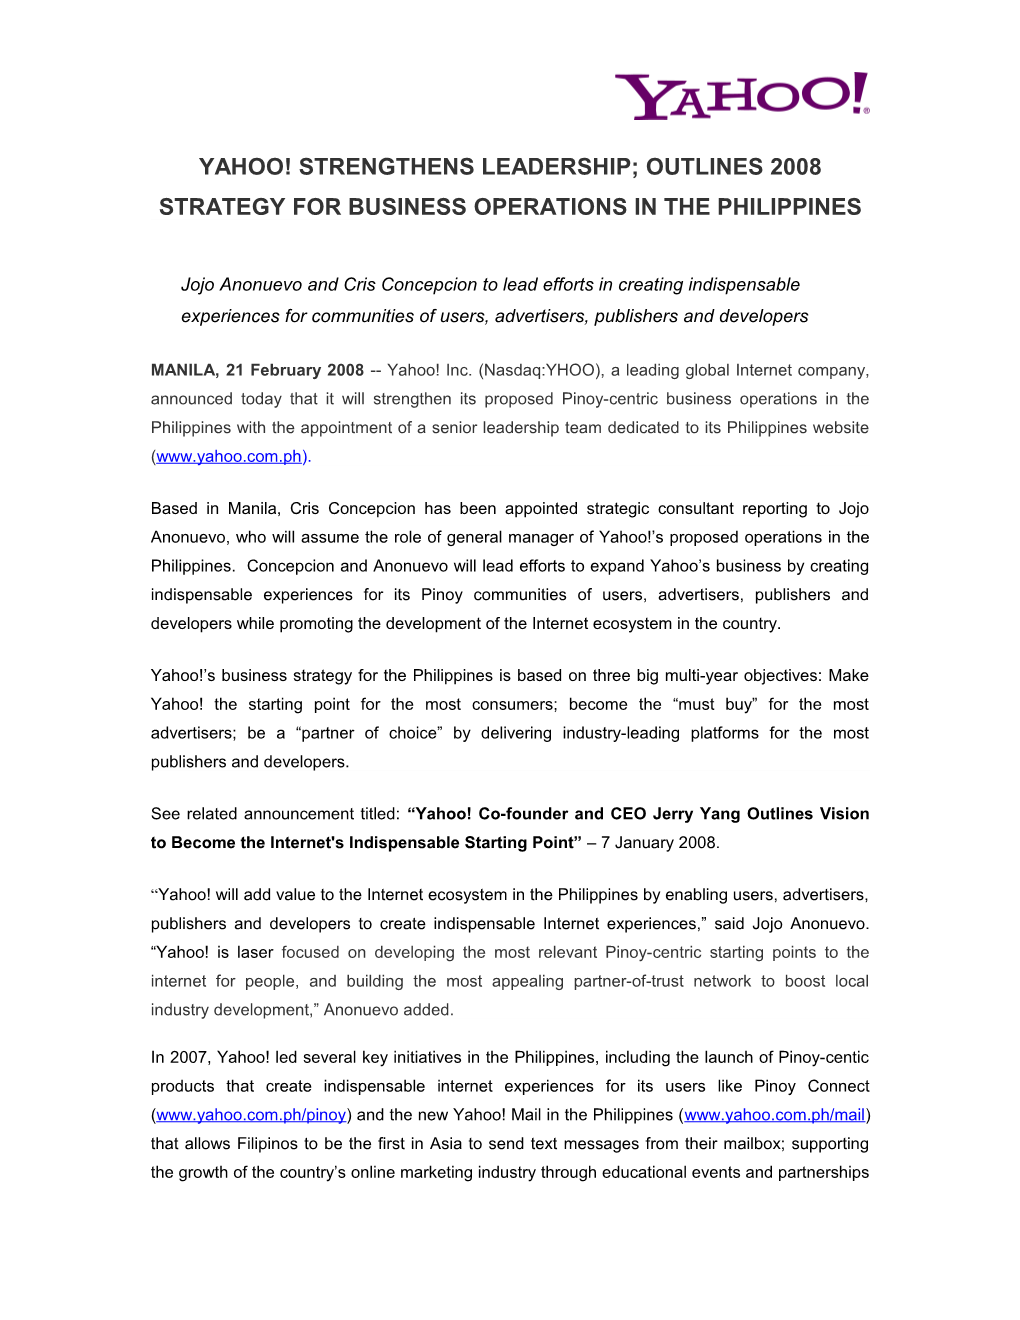 Yahoo! Strengthens Leadership; Outlines 2008 Strategy for Business Operations in The